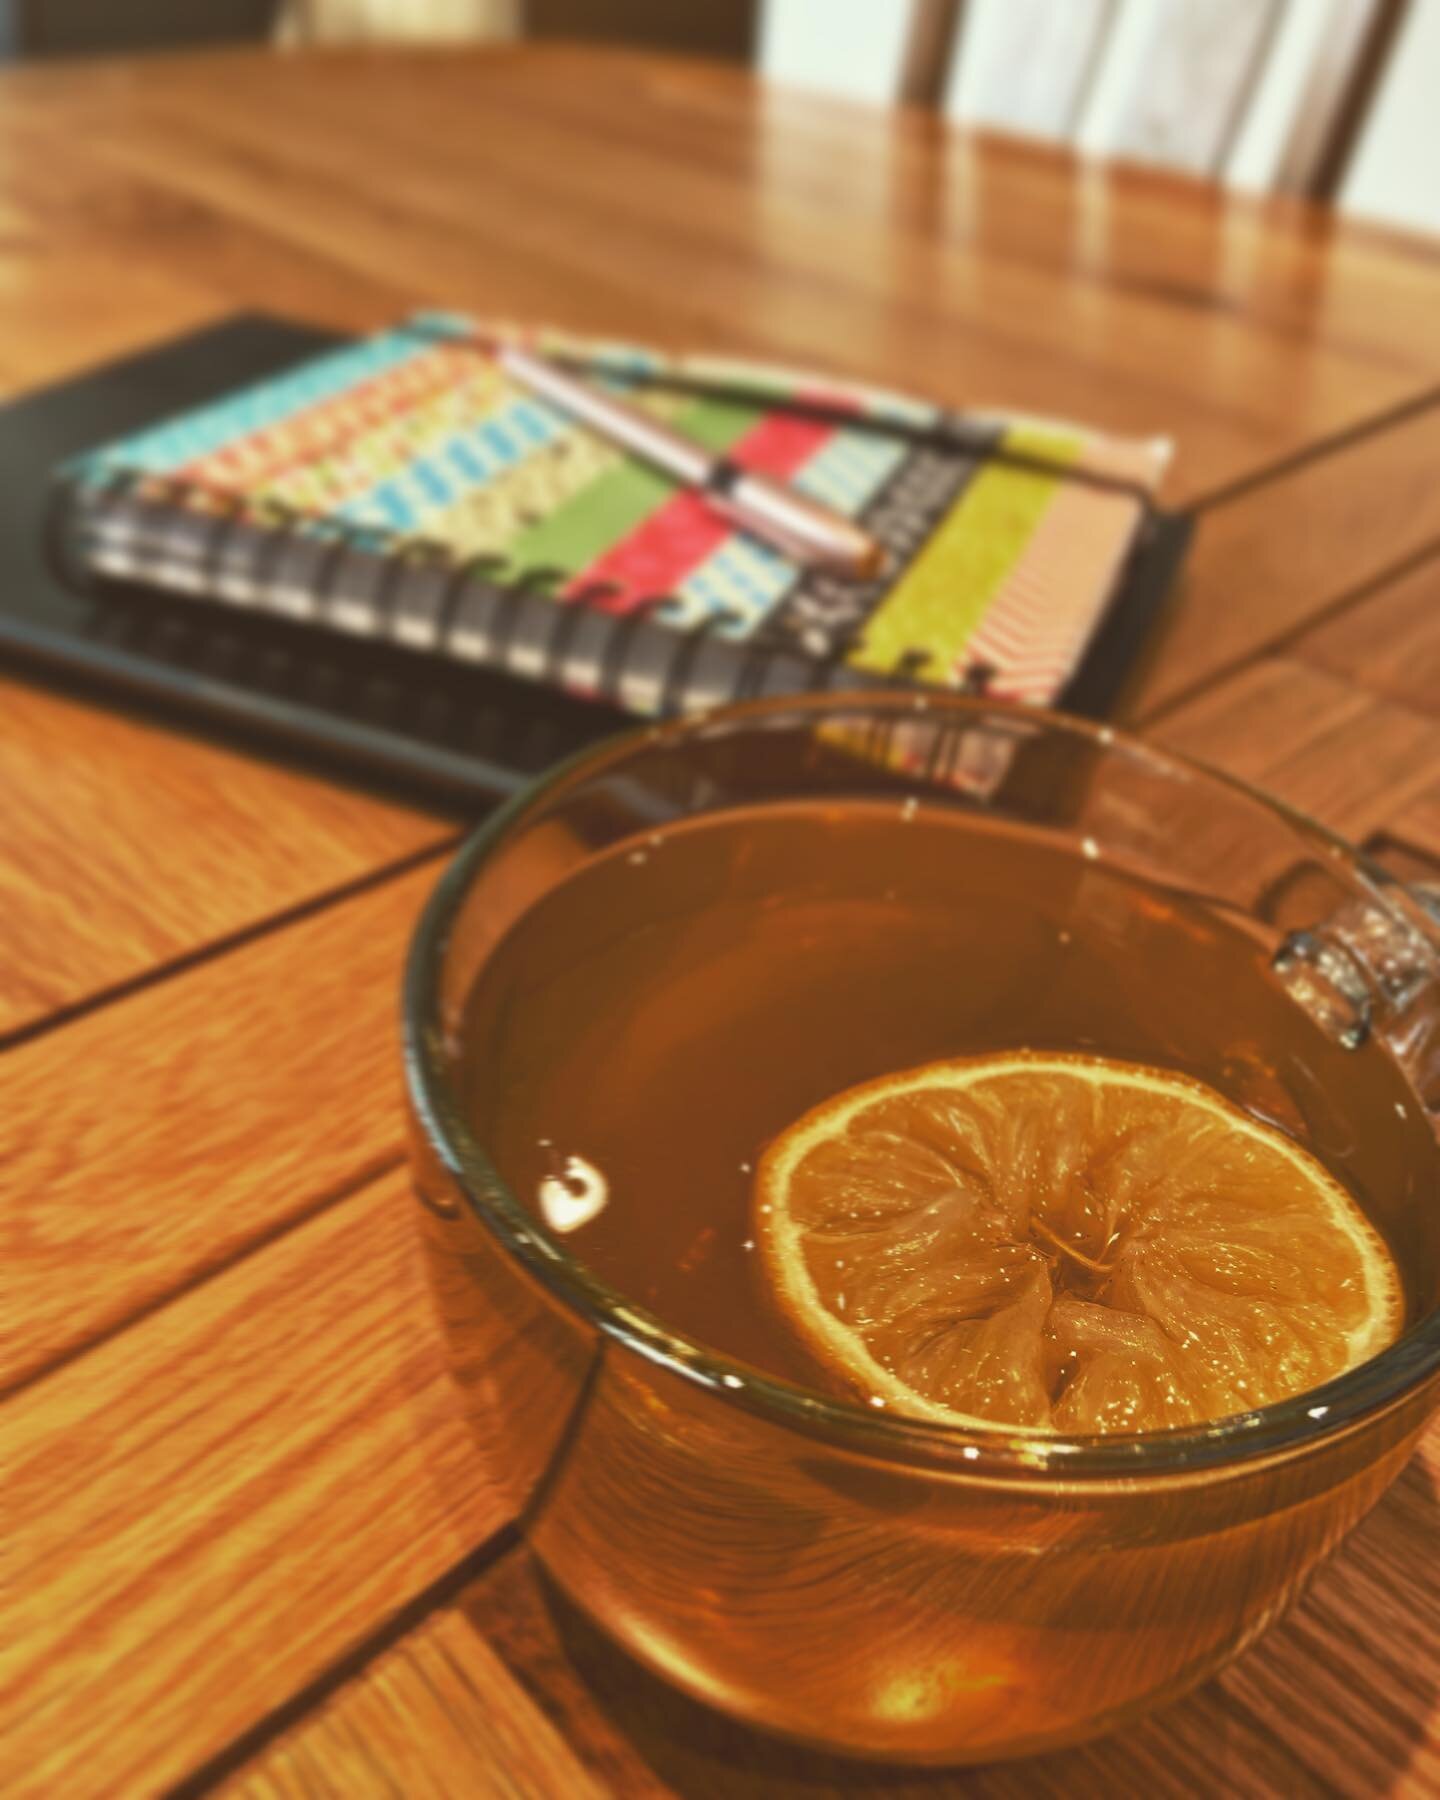 Nothing like honey and lemon tea when you have a cold. Taking a break from editing today to write ideas in my notebook 🖋️☕️

#writing #amwriting #amediting #romancewriter #reverseharem #reverseharemromance #writer #writersofinstagram